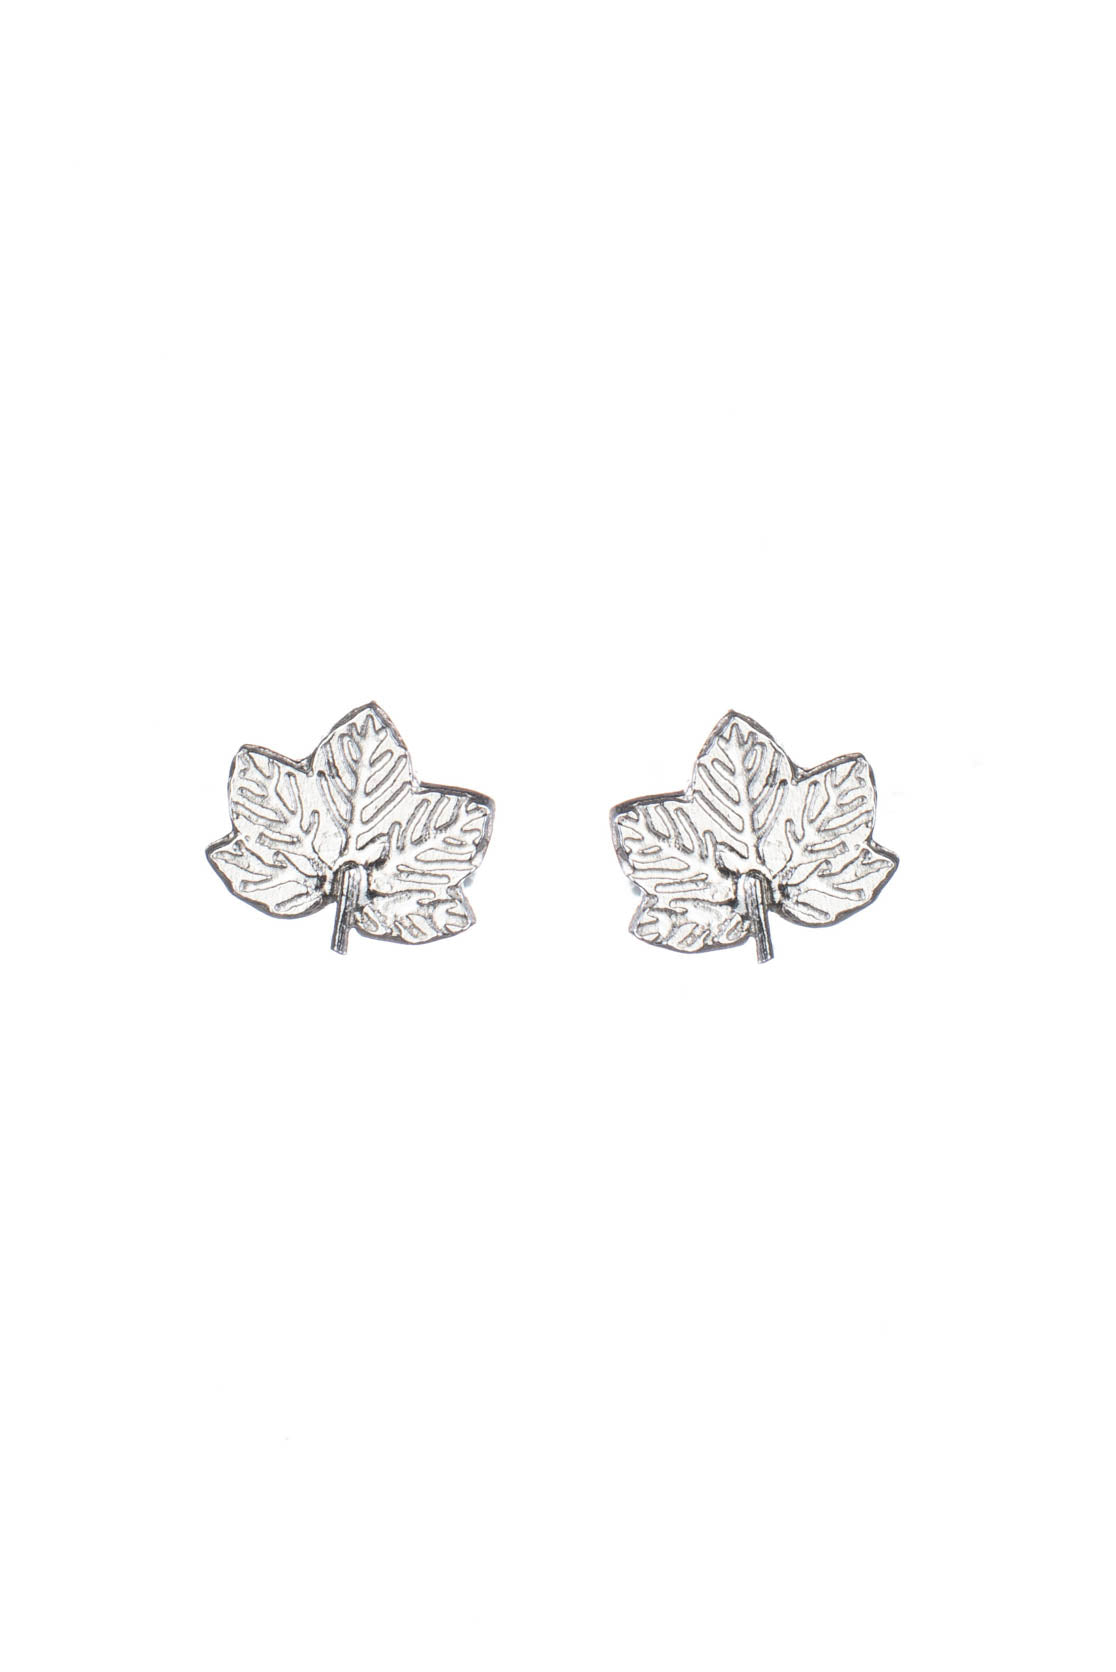 Small Sycamore Leaf Stud Earrings